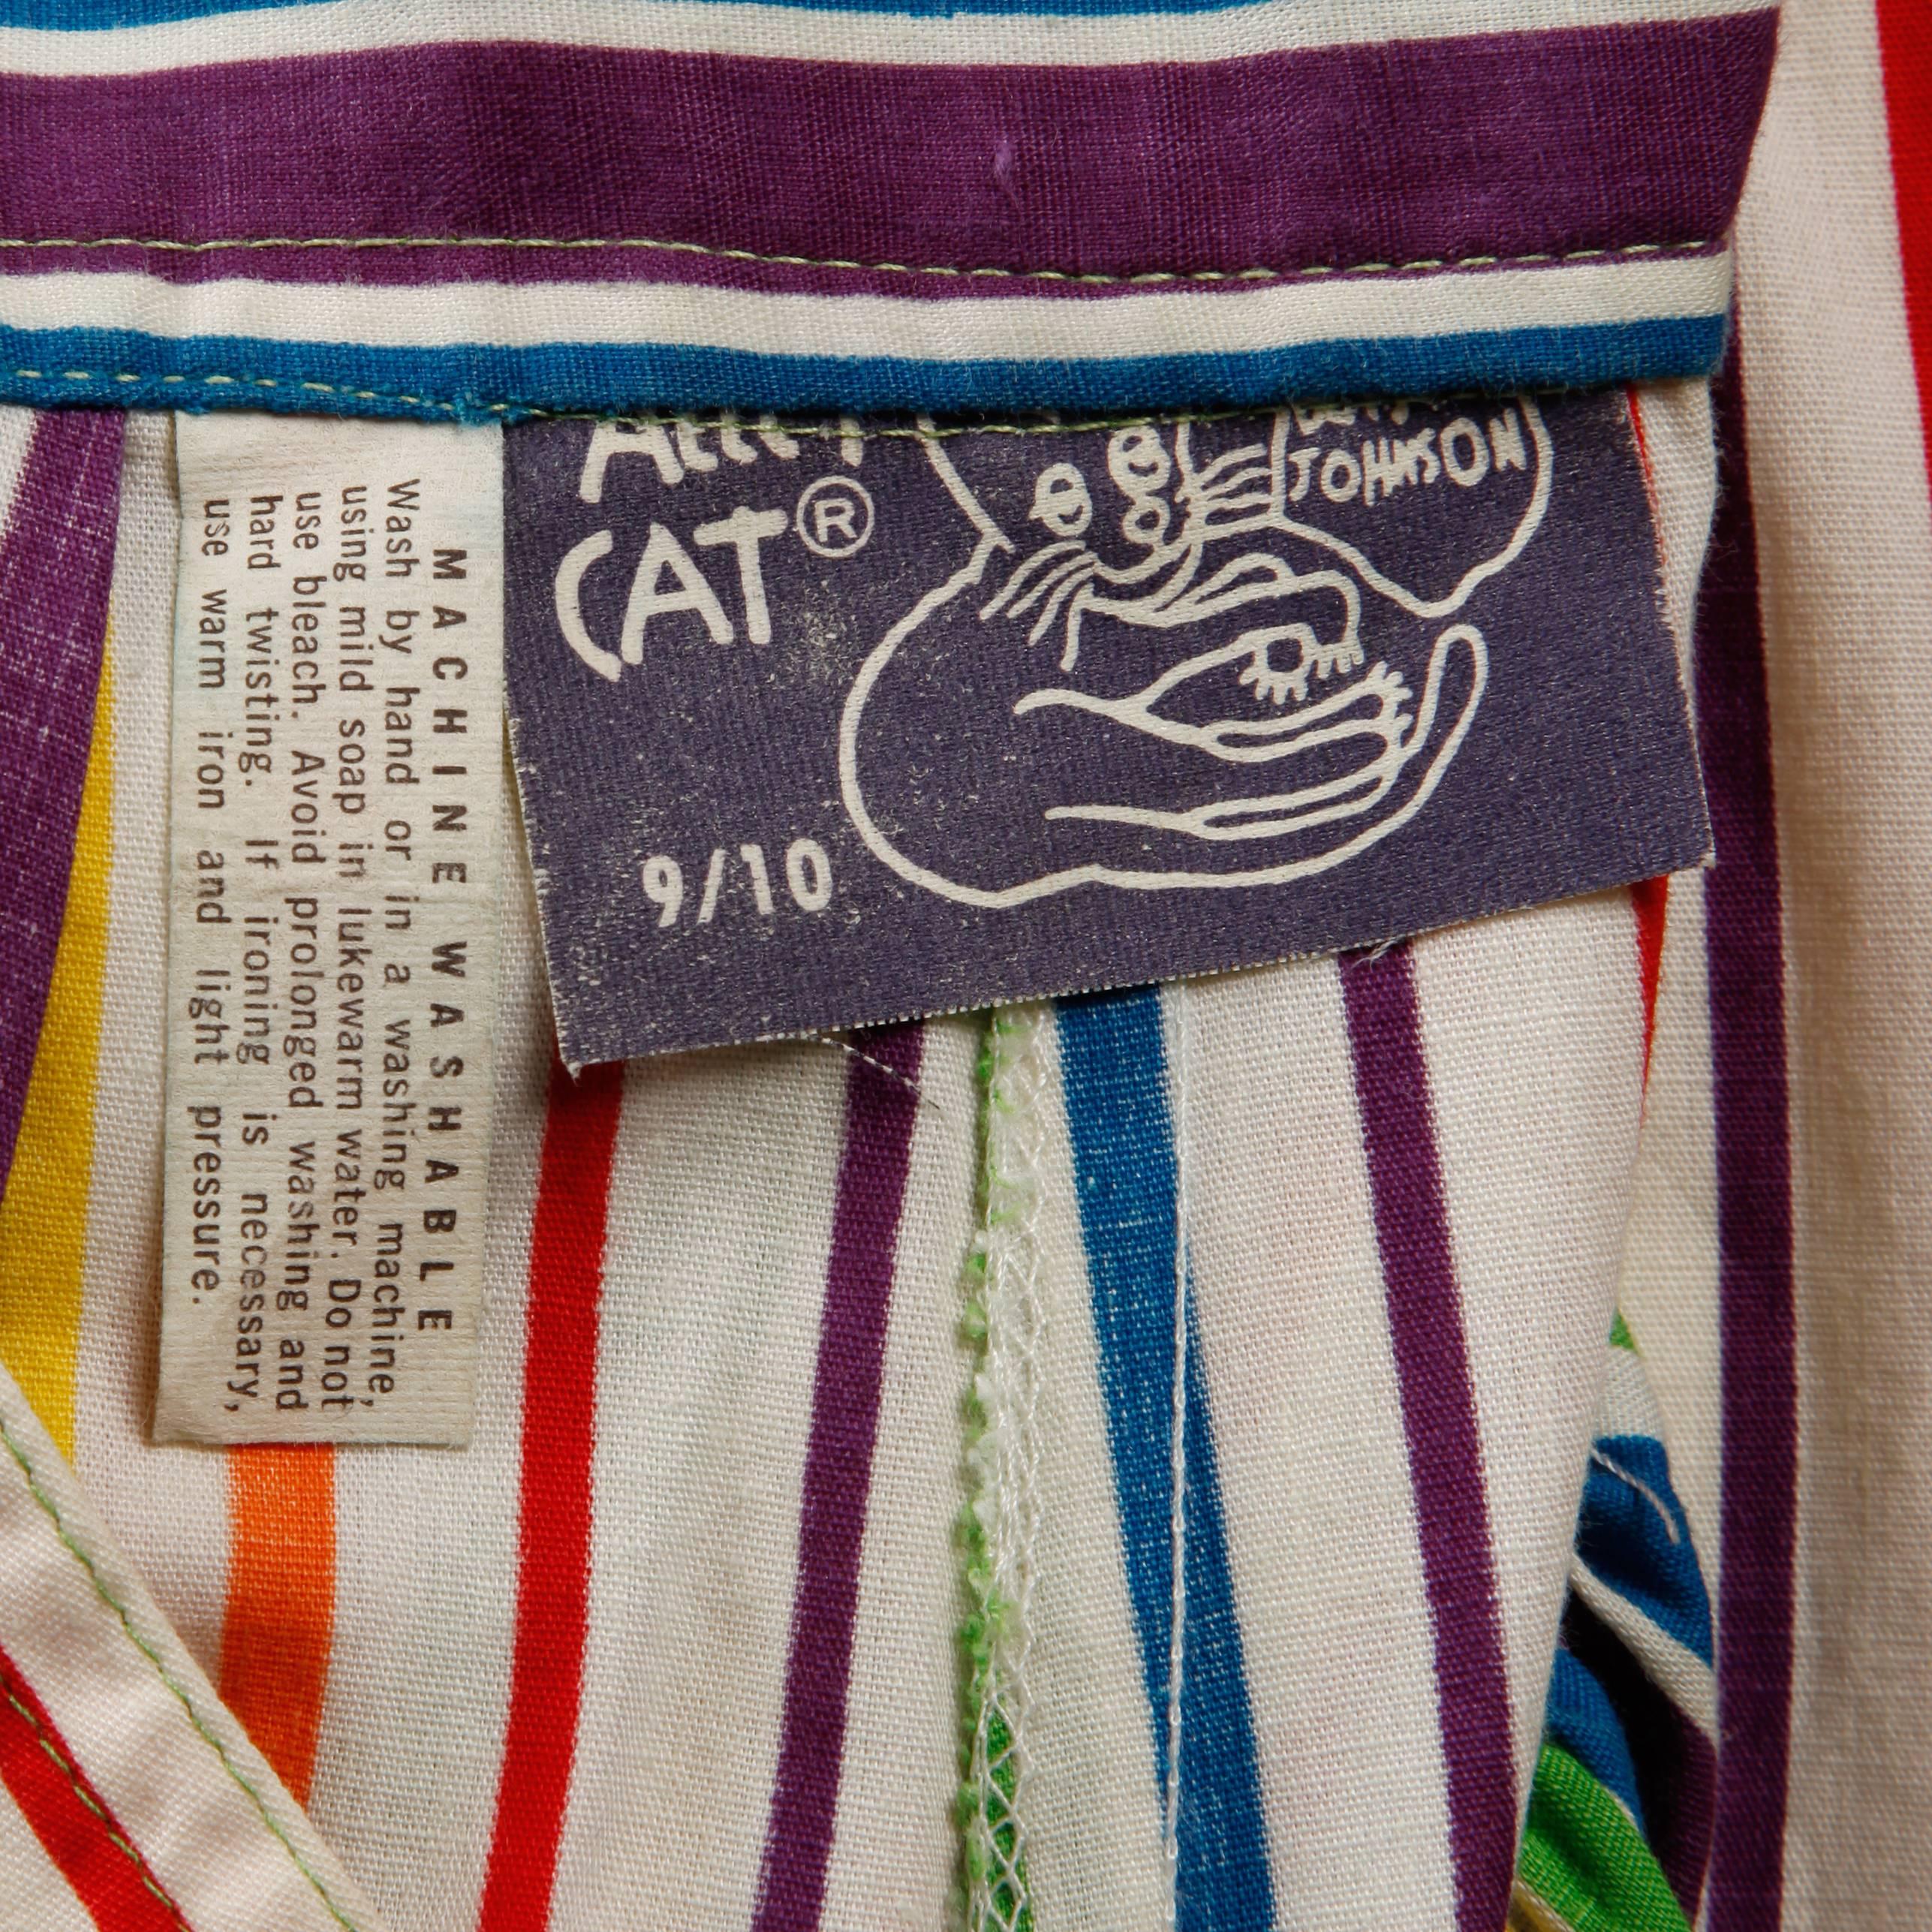 Heart-melting 1970s rainbow striped palazzo pants by Betsey Johnson for Alley Cat. Extremely rare early Betsey Johnson label is extremely collectible. These are definitely an investment piece! Wide leg and high waist with green buttons and a metal